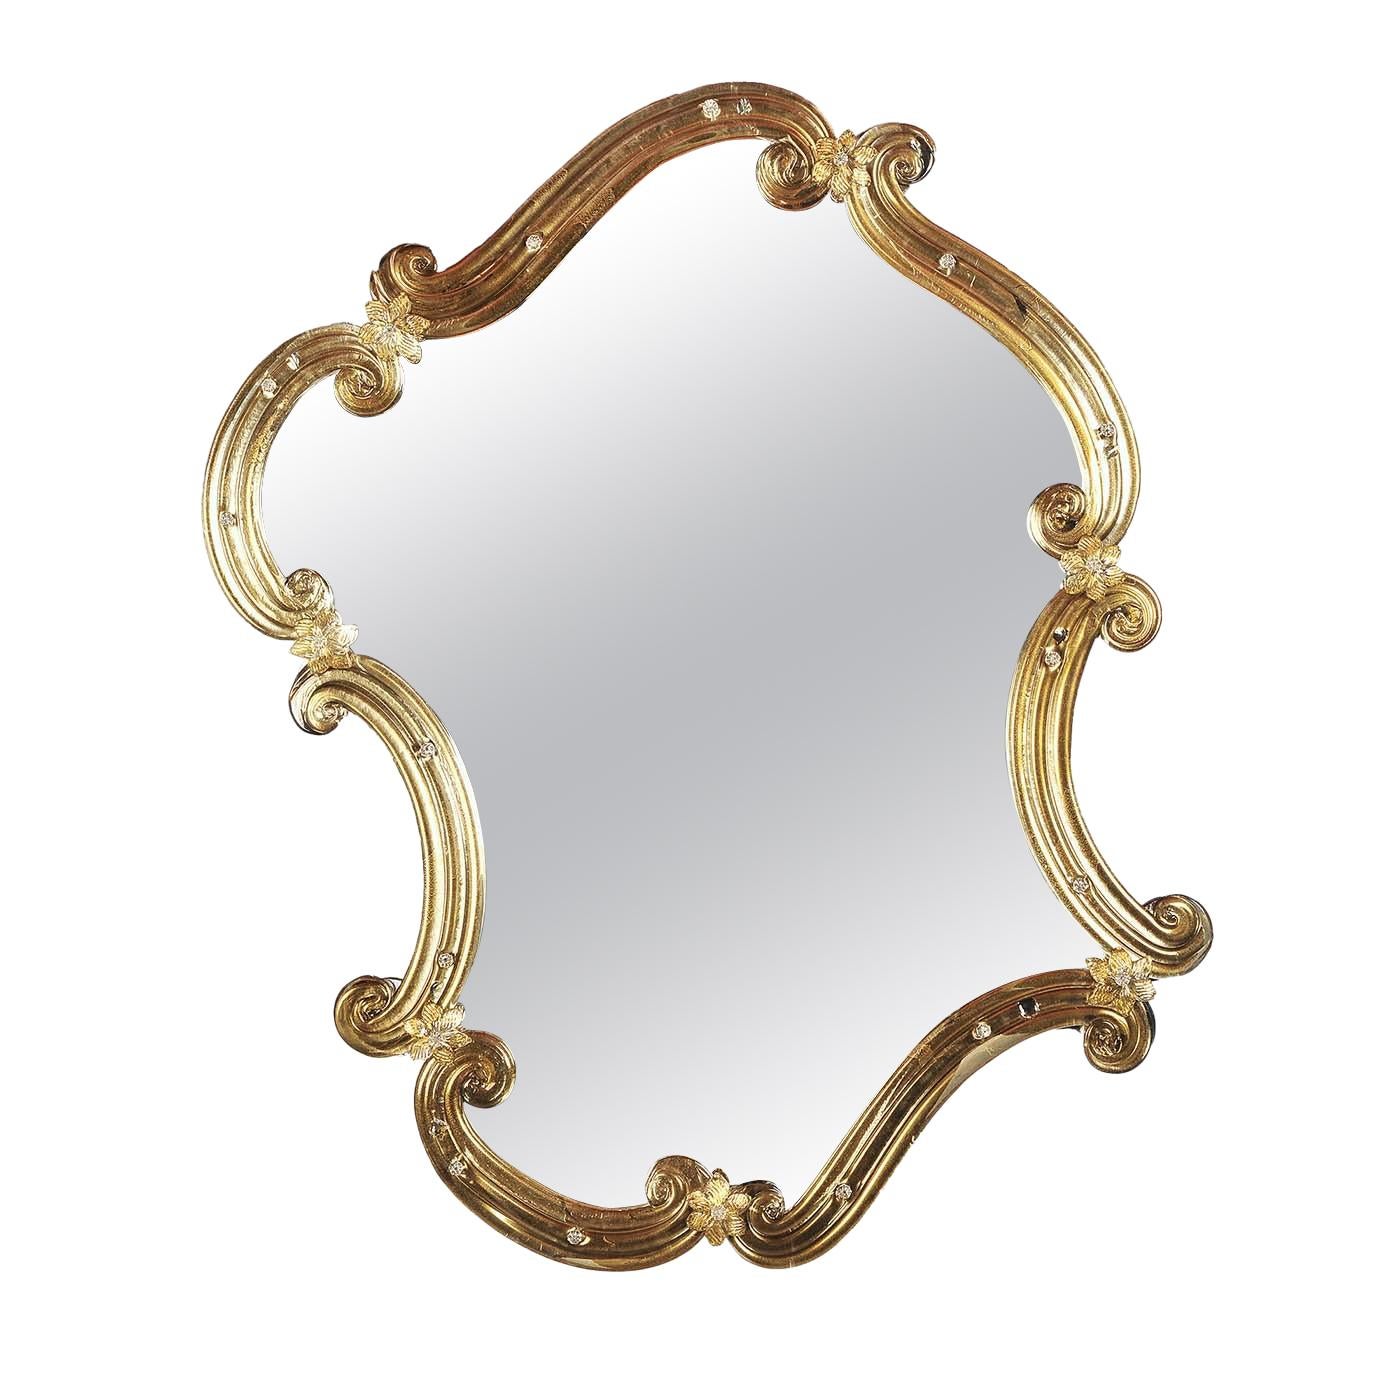 Storti Co L'Oro Mirror by Ongaro & Fuga For Sale